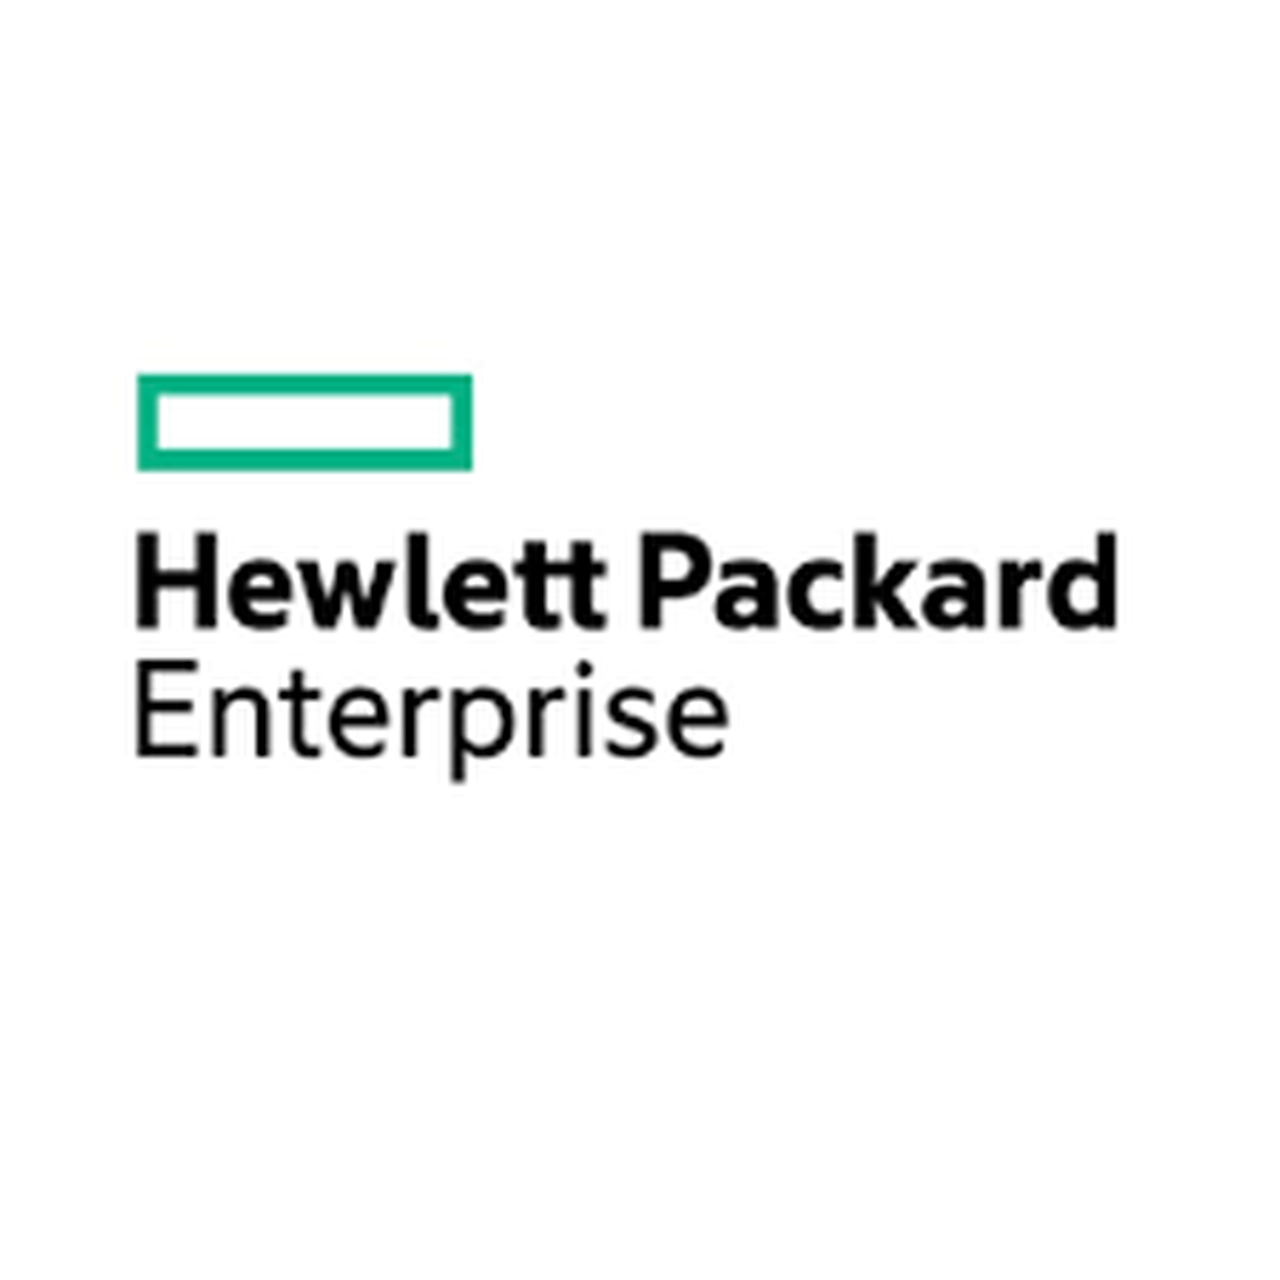 HPE 5940 48p 10GBT/6p 100G 2 F PS Bundled Services Removal